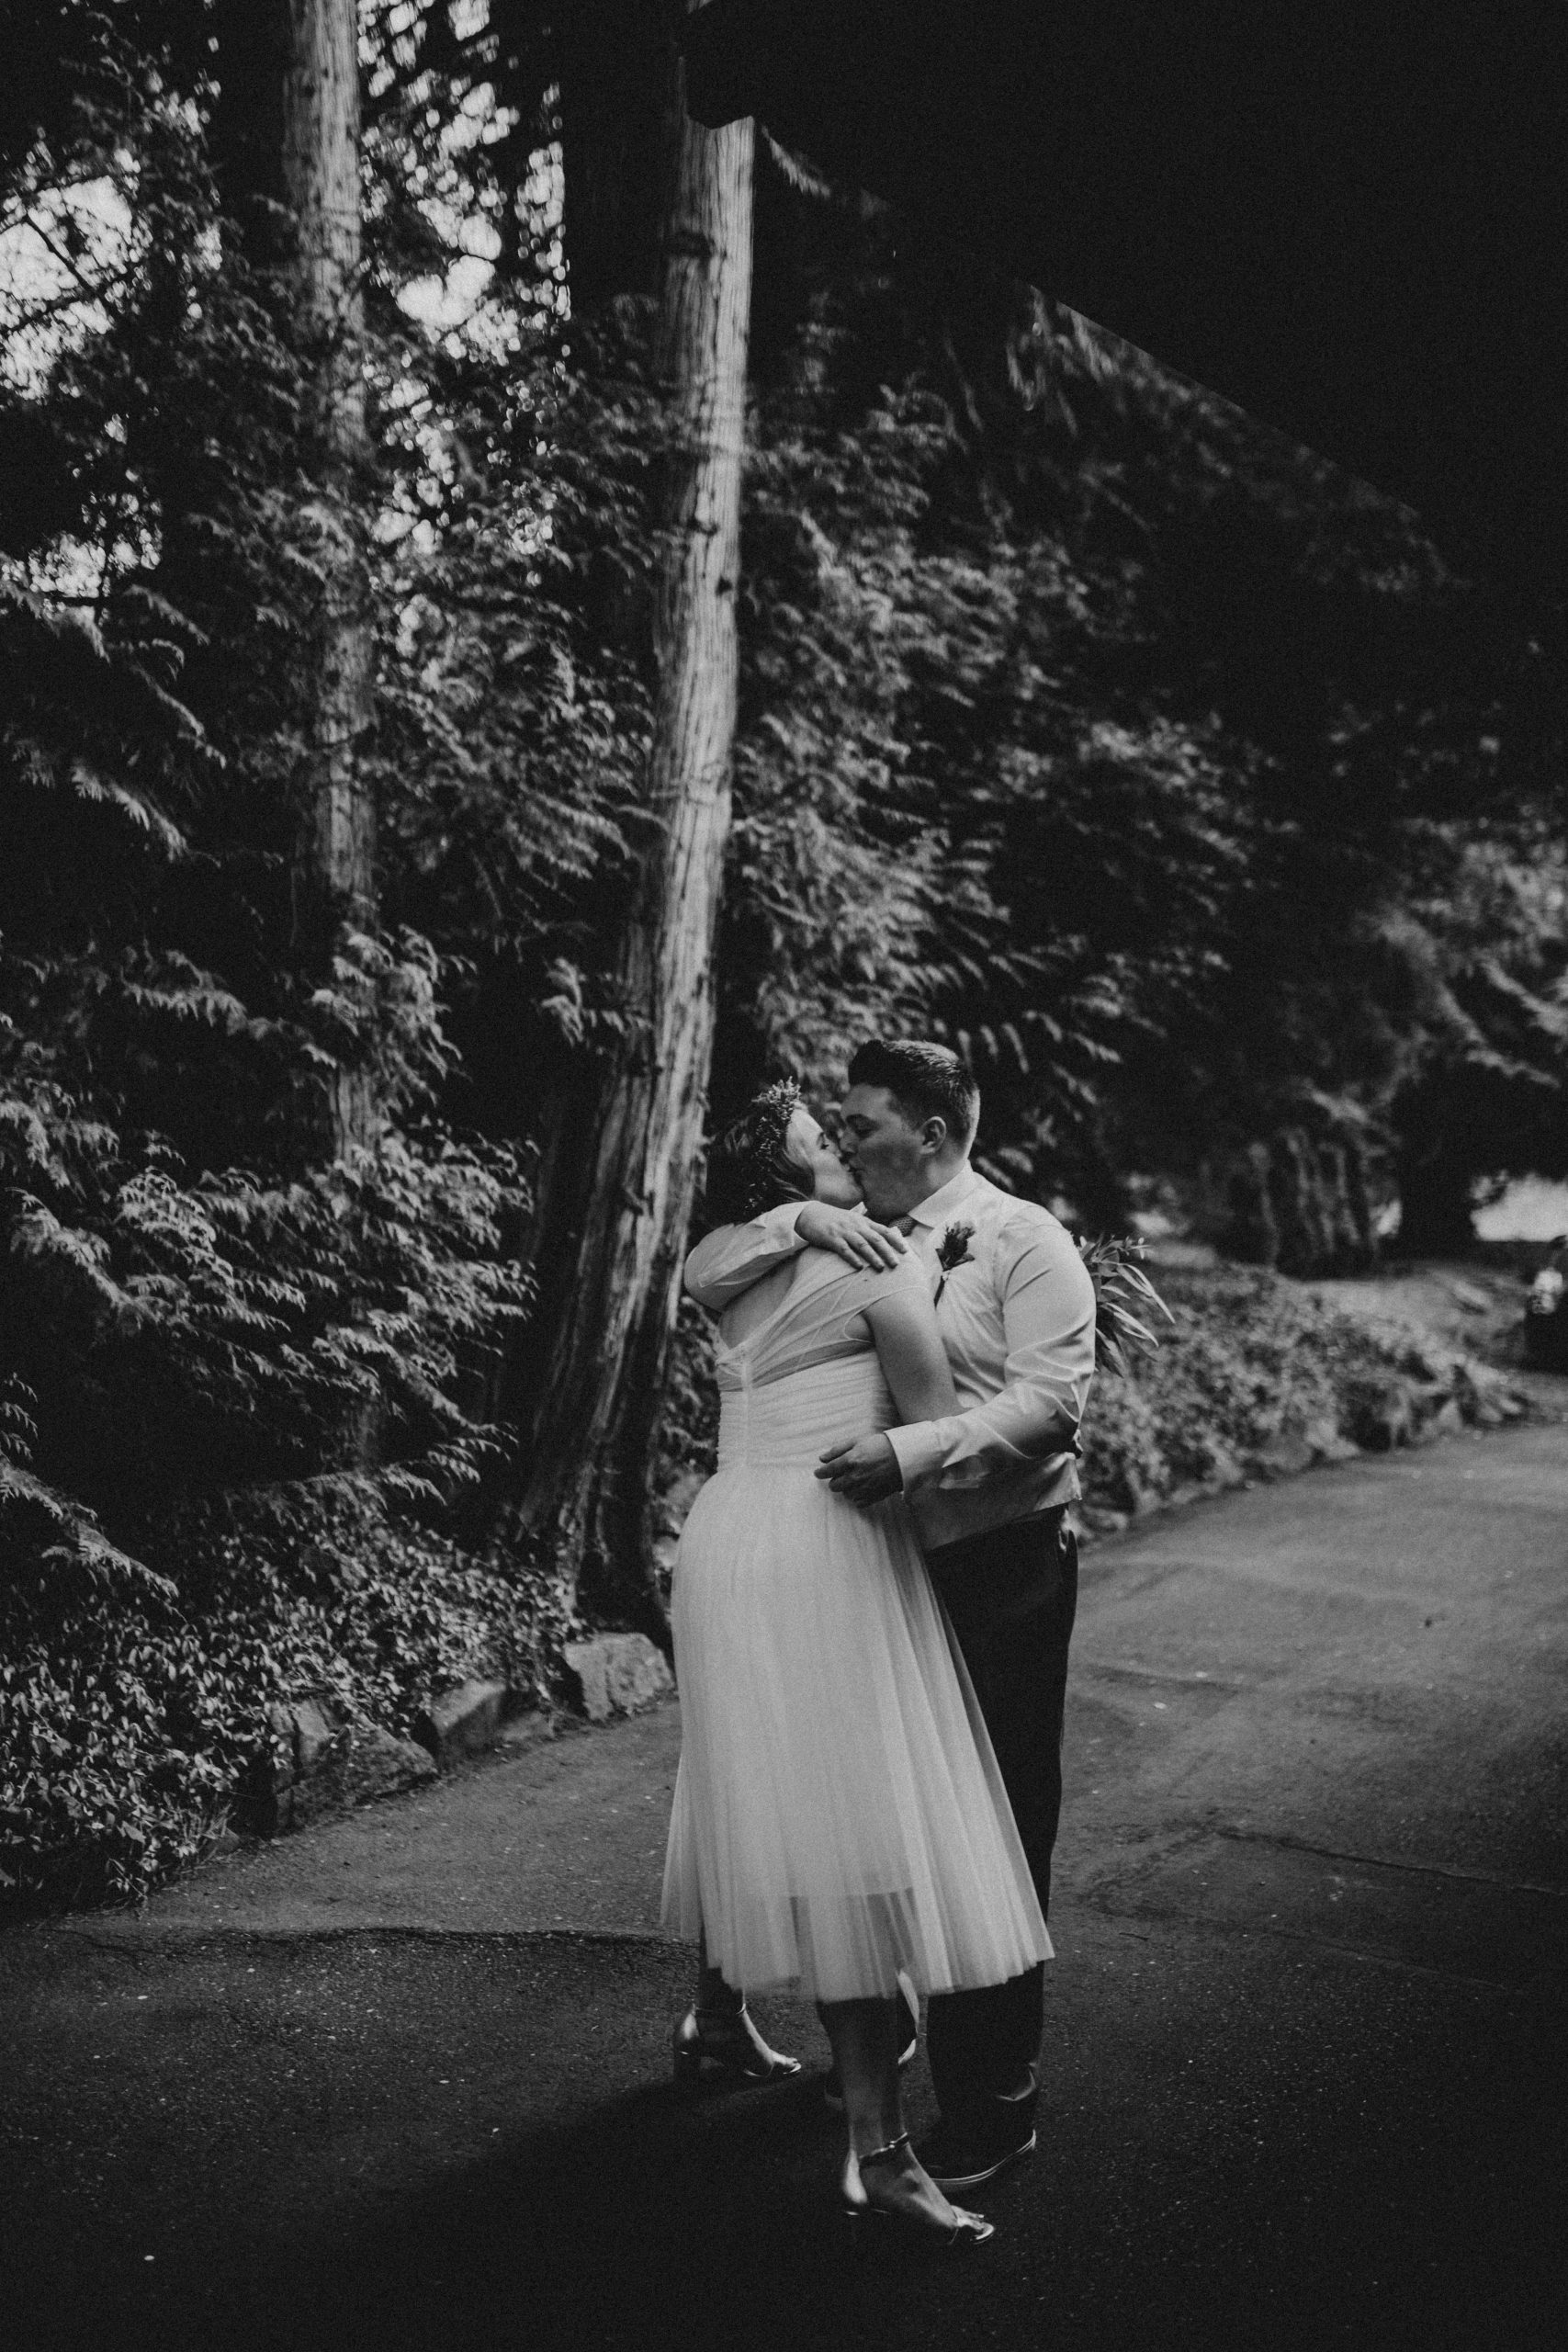 Bride and Groom kiss after their wedding ceremony picture taken in black and white | Seattle Wedding Photographer, Seattle Elopement Photographer | chelseaabril.com